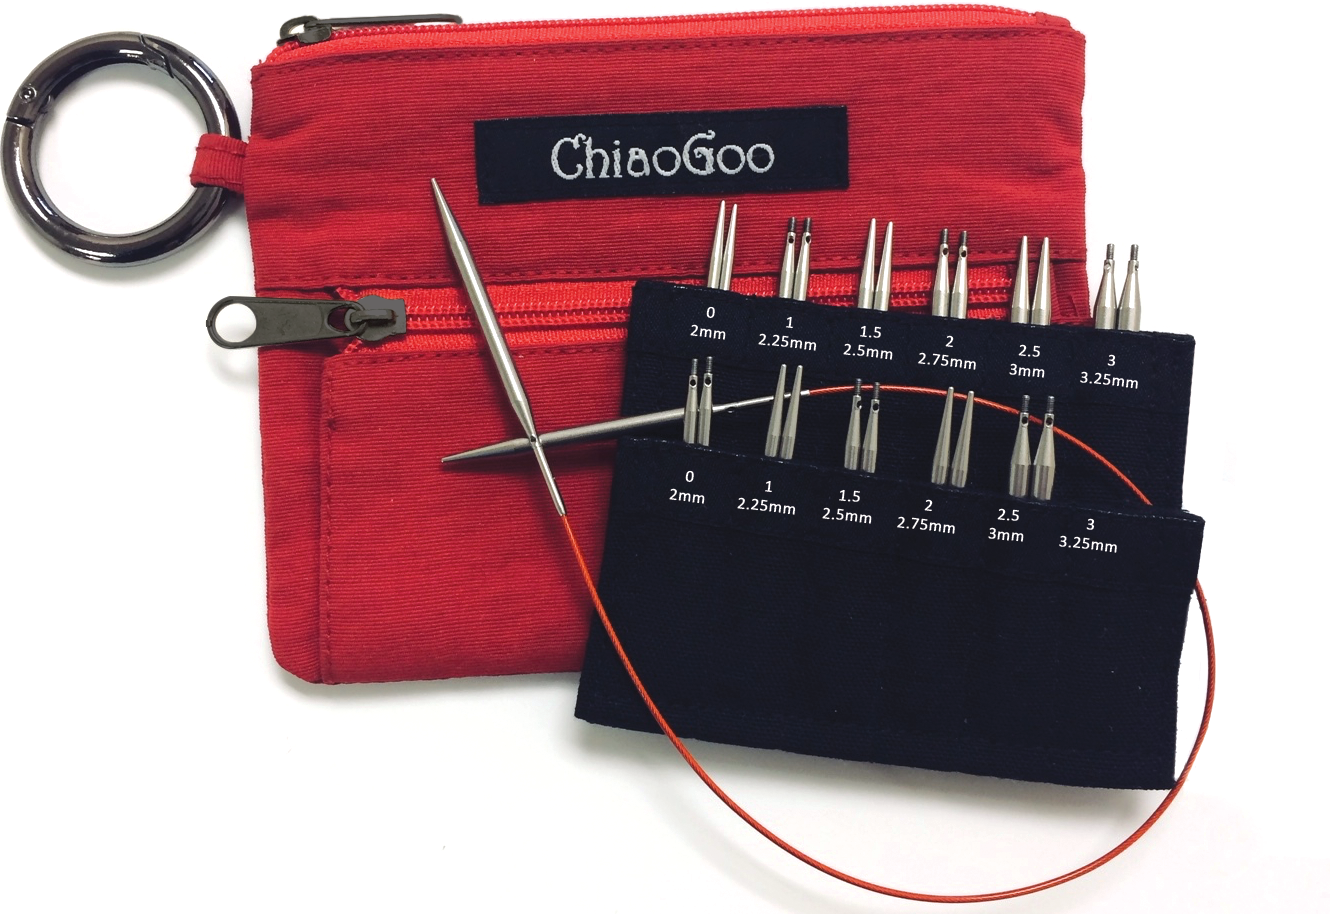 ChiaoGoo Twist Shorties Interchangeable set showing red pouch and 2 and 3 inch tips